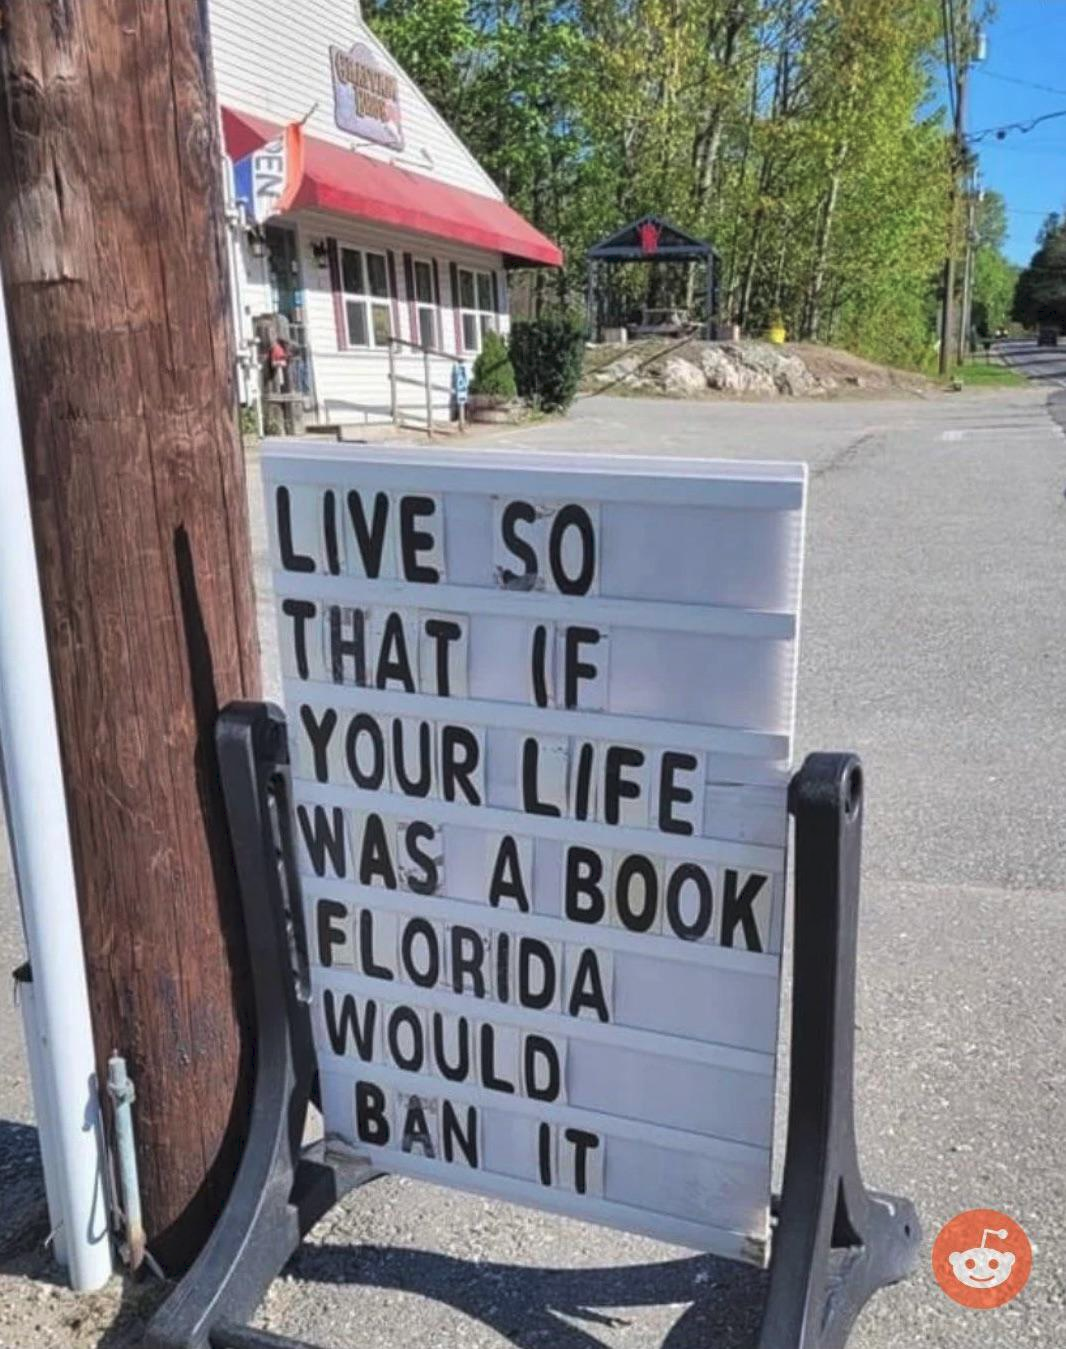 Live so that if your life was a book Florida would ban it